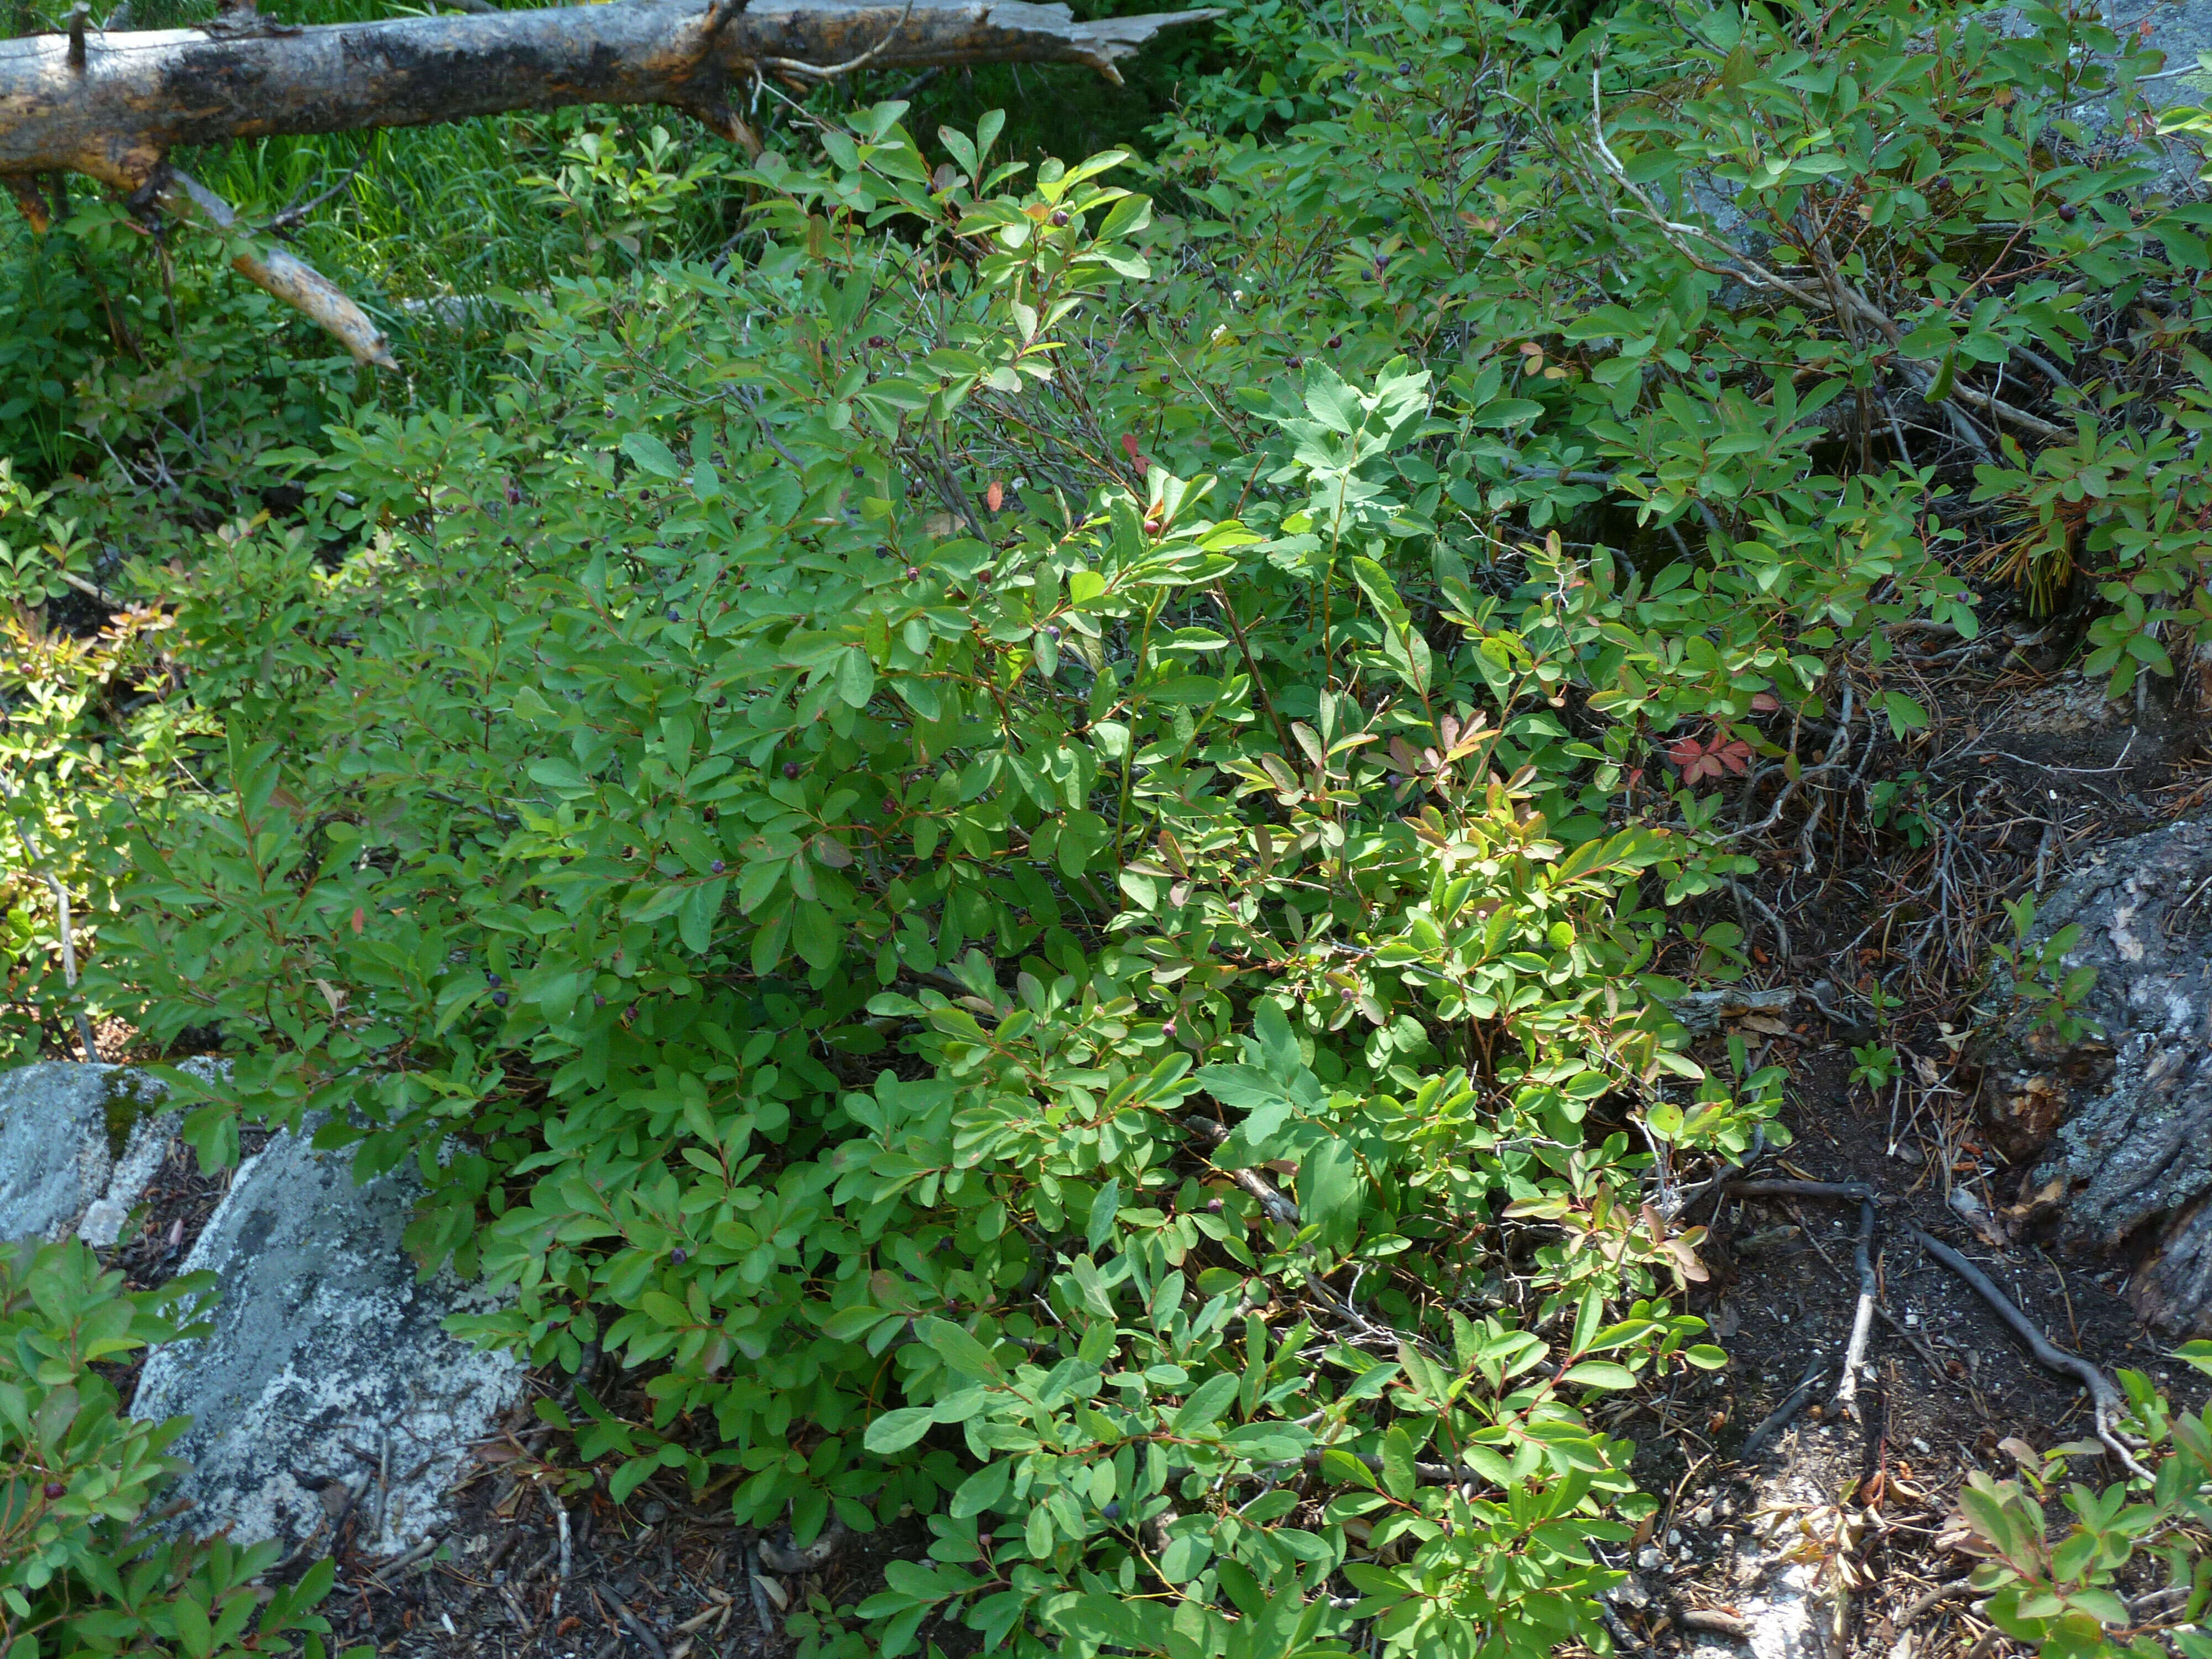 Image of thinleaf huckleberry